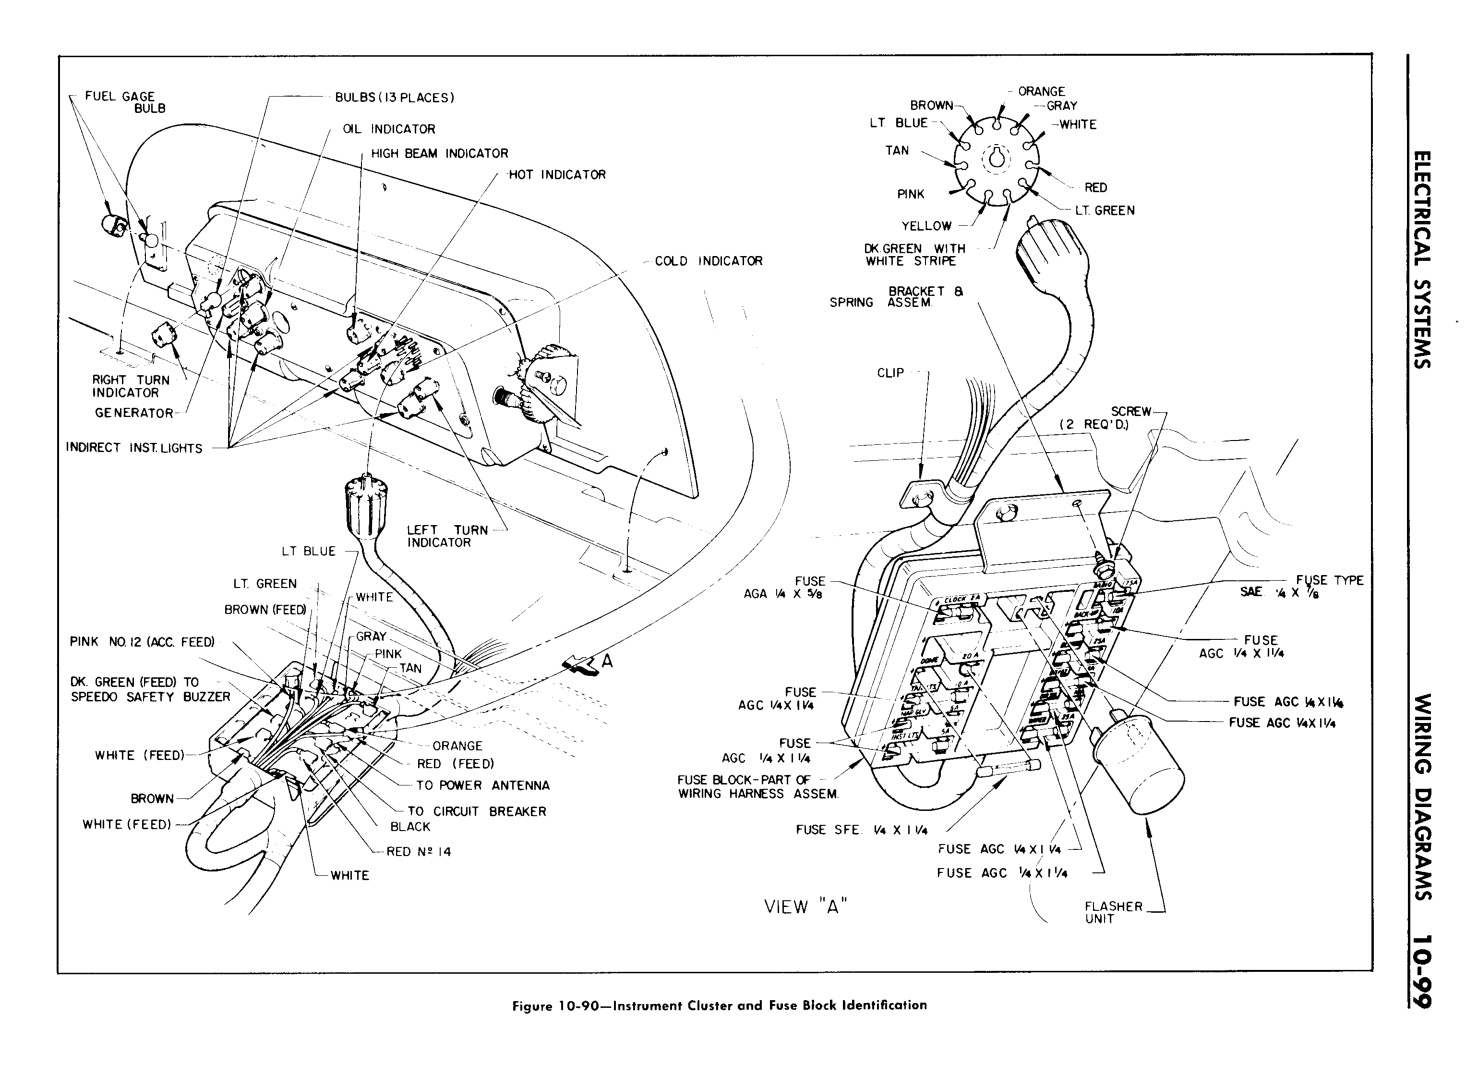 n_11 1960 Buick Shop Manual - Electrical Systems-099-099.jpg